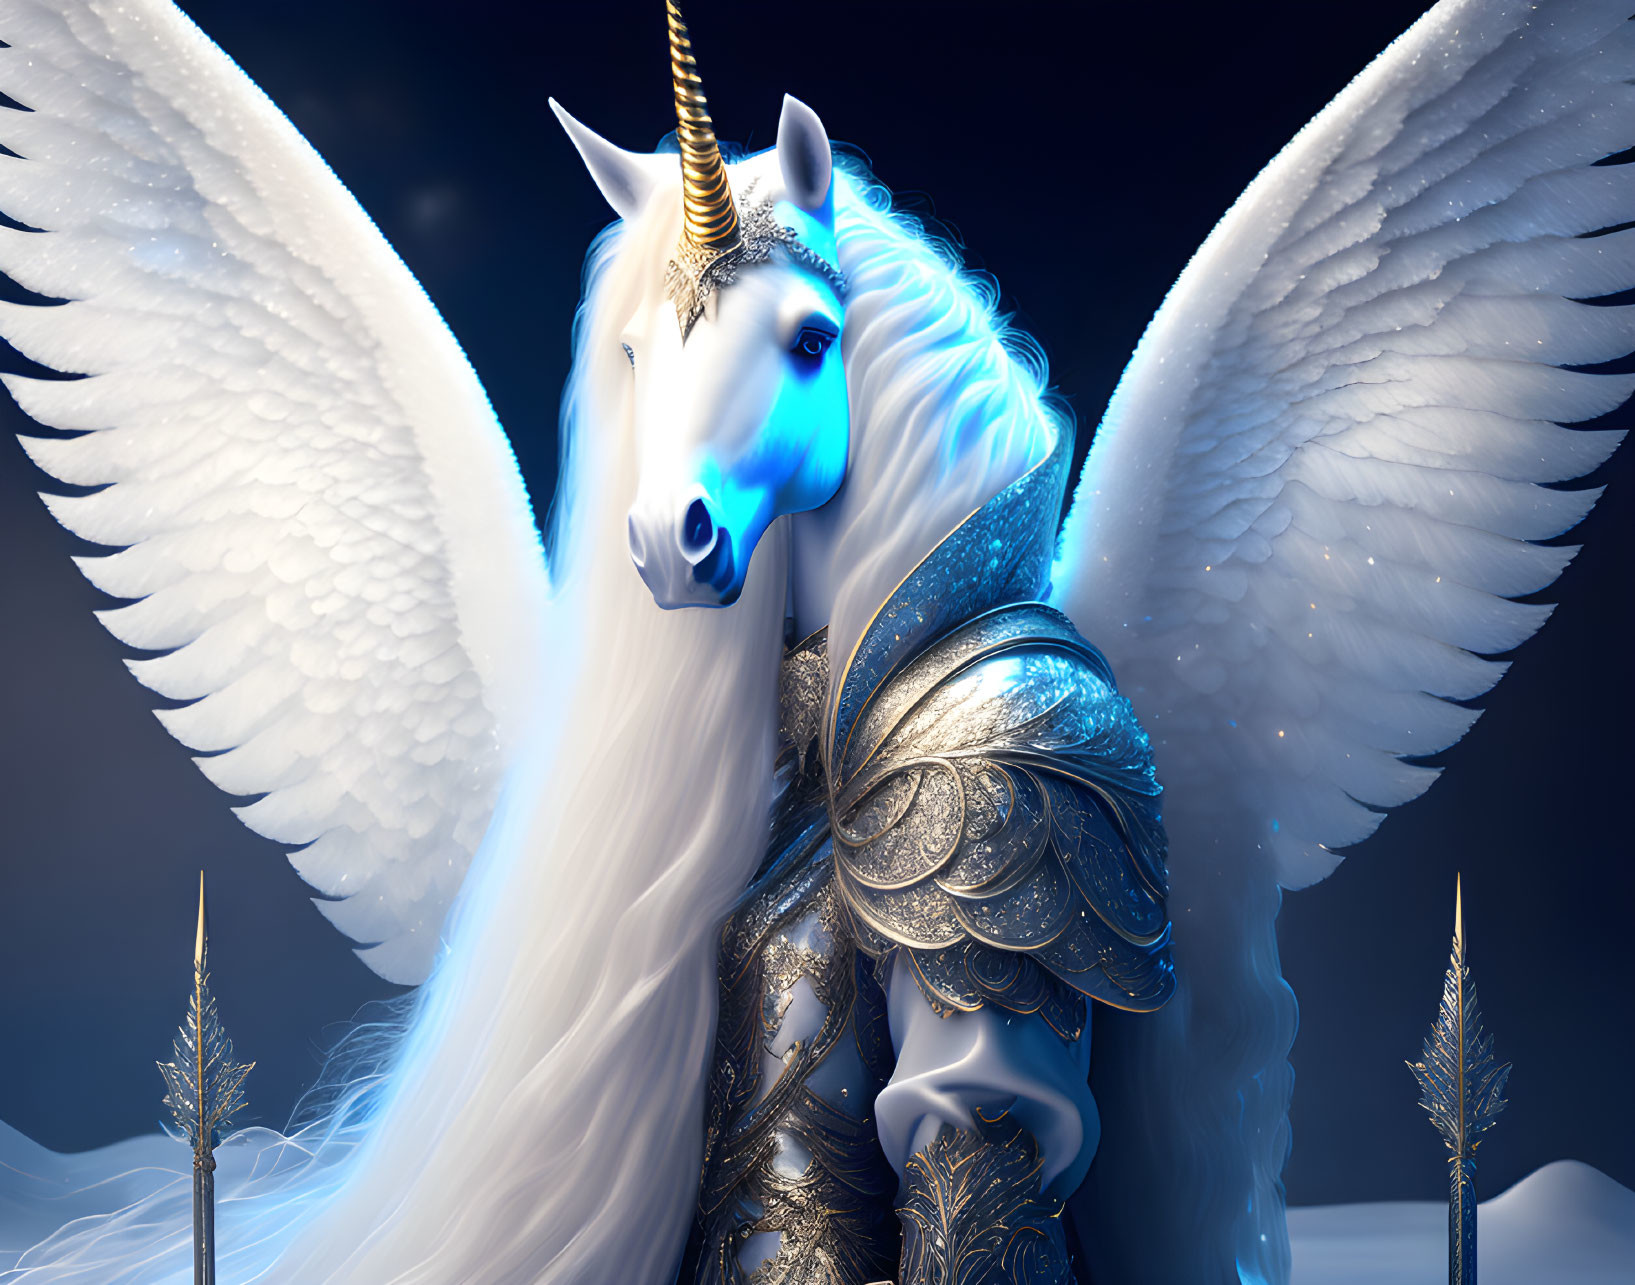 Majestic winged unicorn with golden horn in elaborate armor against twilight backdrop